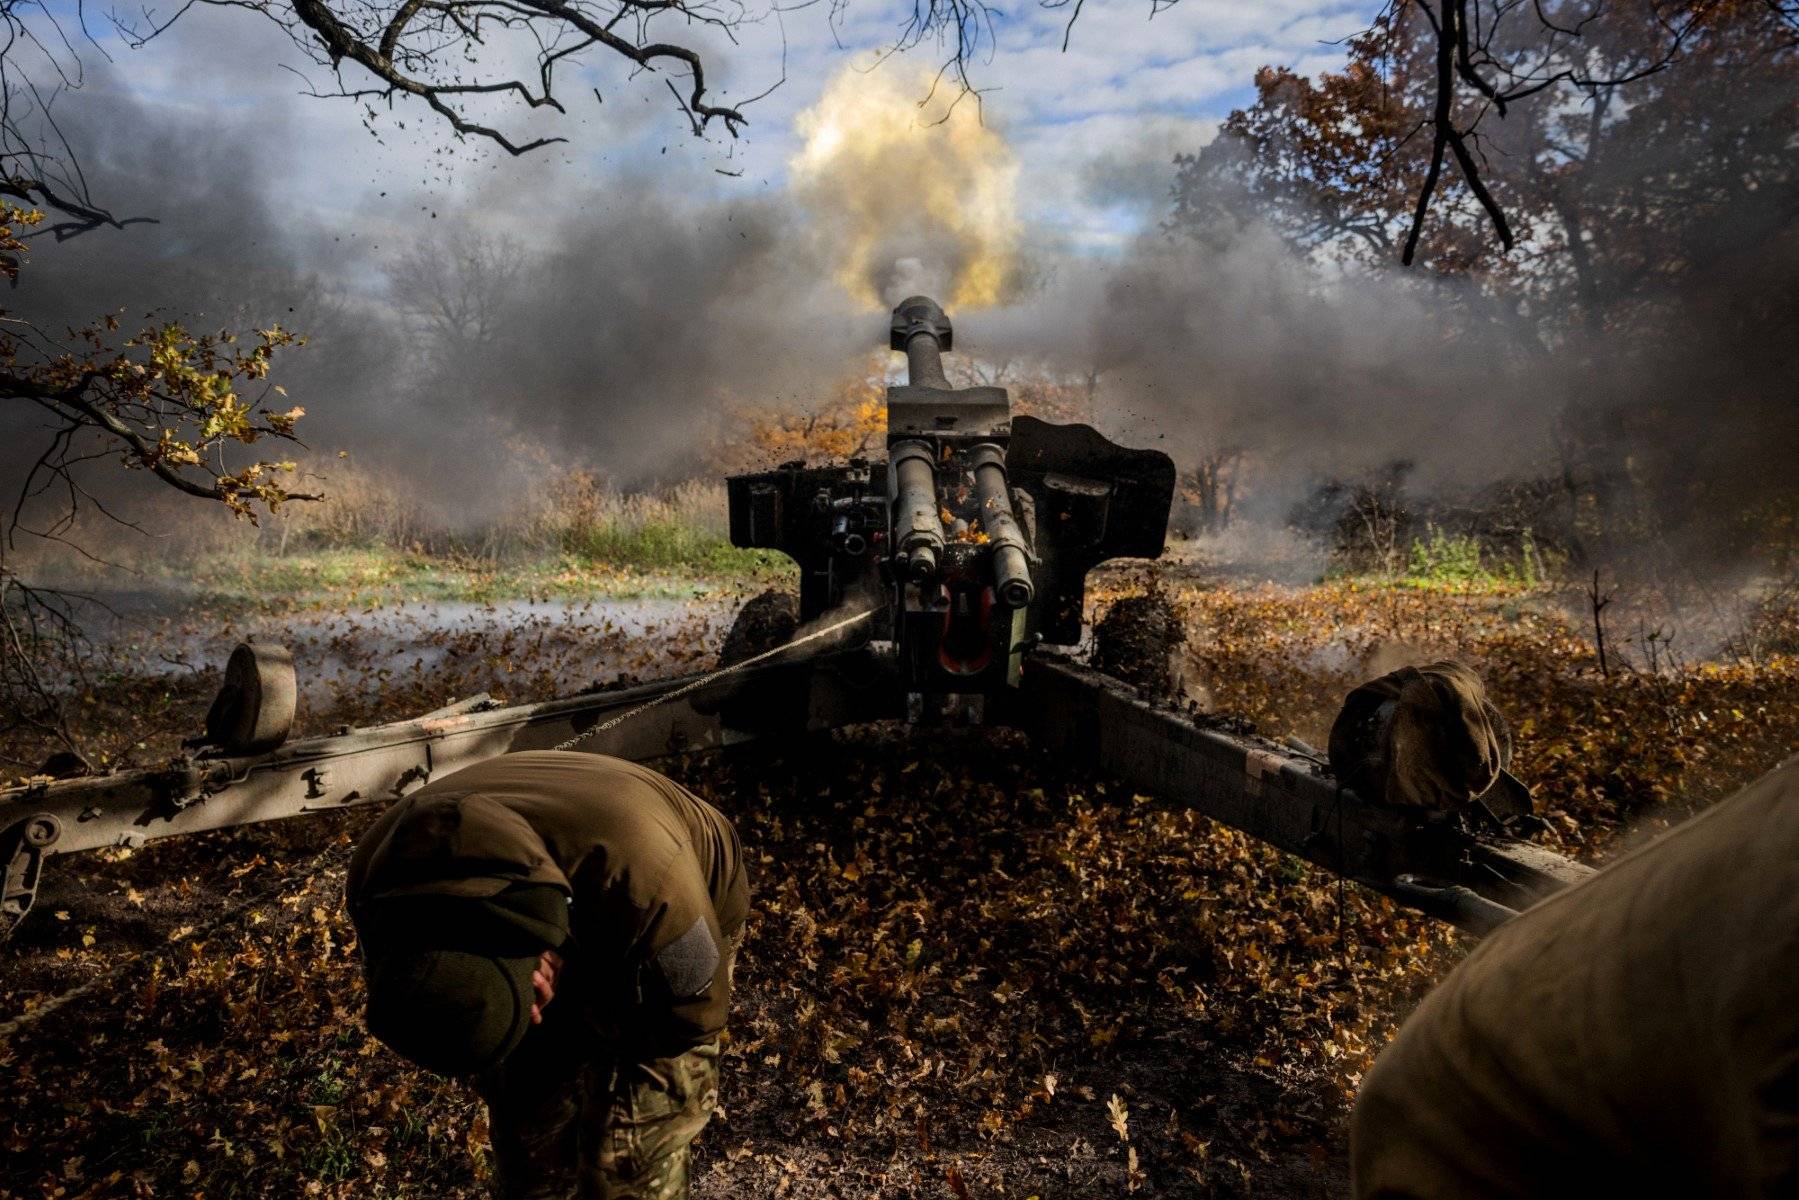 Ukrainian artillerymen fire a 152 mm towed gun-howitzer (D20) at a position on the front line near the town of Bakhmut, in eastern Ukraine's Donetsk region, on October 31, 2022, amid Russian invasion of Ukraine. (Photo by Dimitar DILKOFF / AFP)